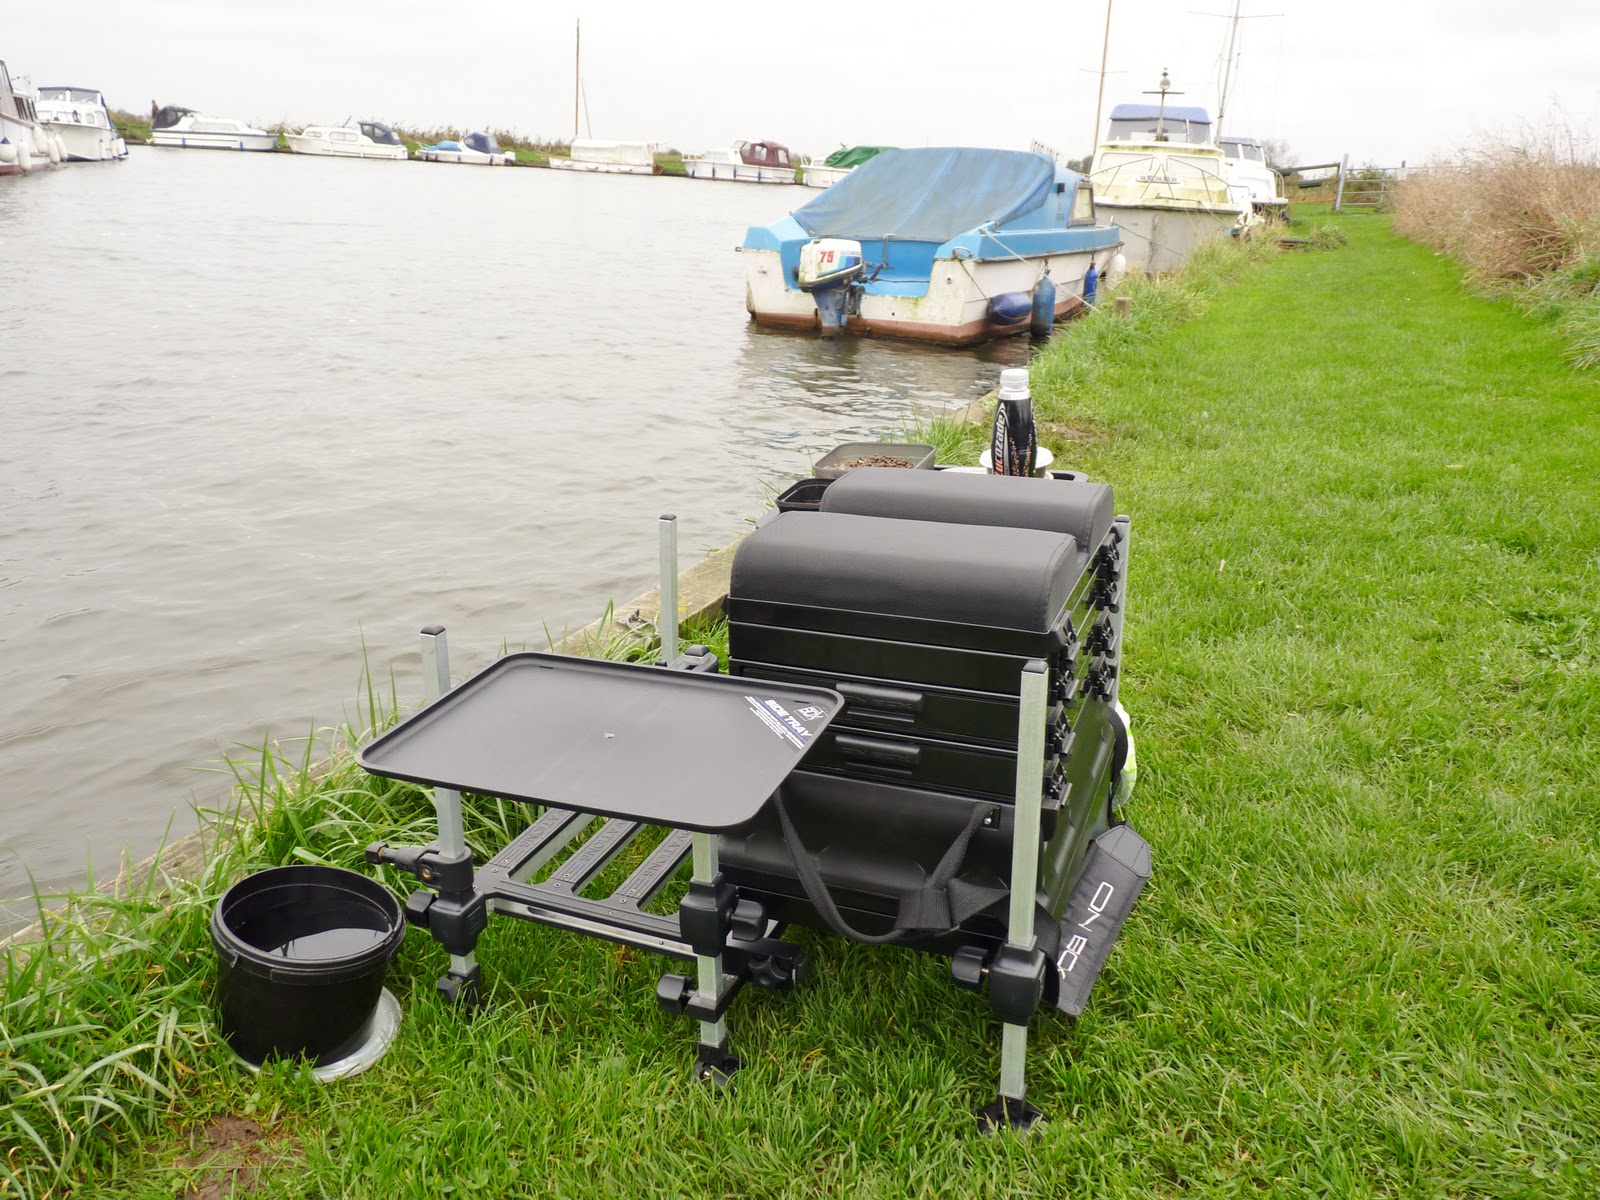 NORFOLK ANGLING BLOG: Preston Innovations Limited Edition Seatbox Review